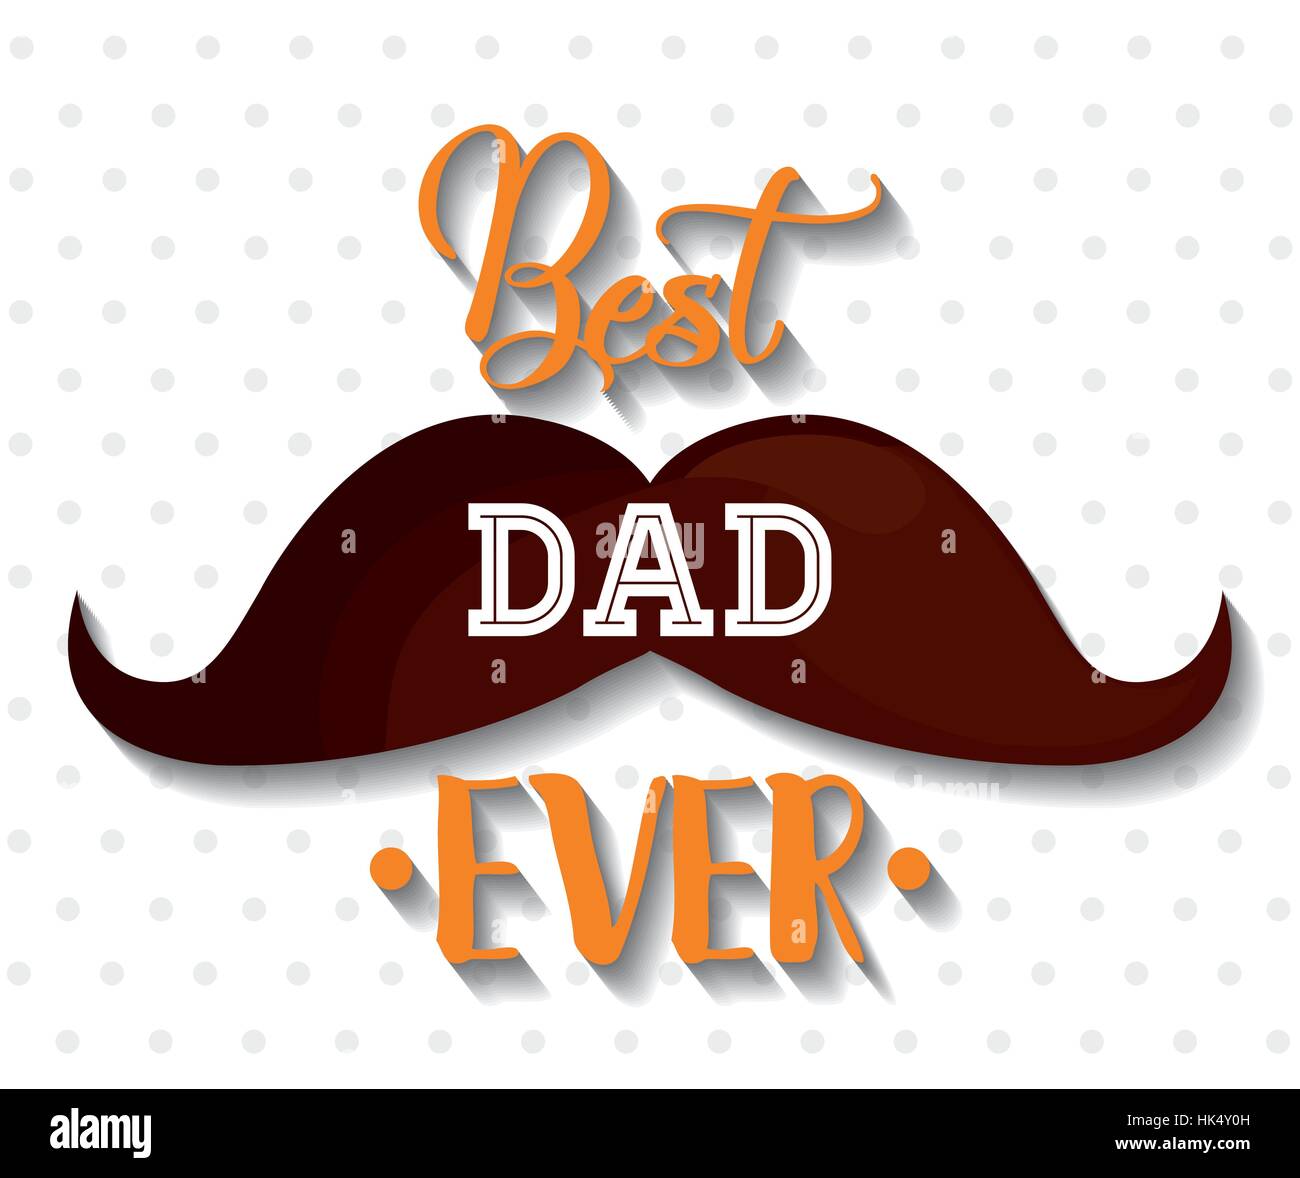 best dad ever happy fathers day letters emblem and related icons image vector illustration design Stock Vector